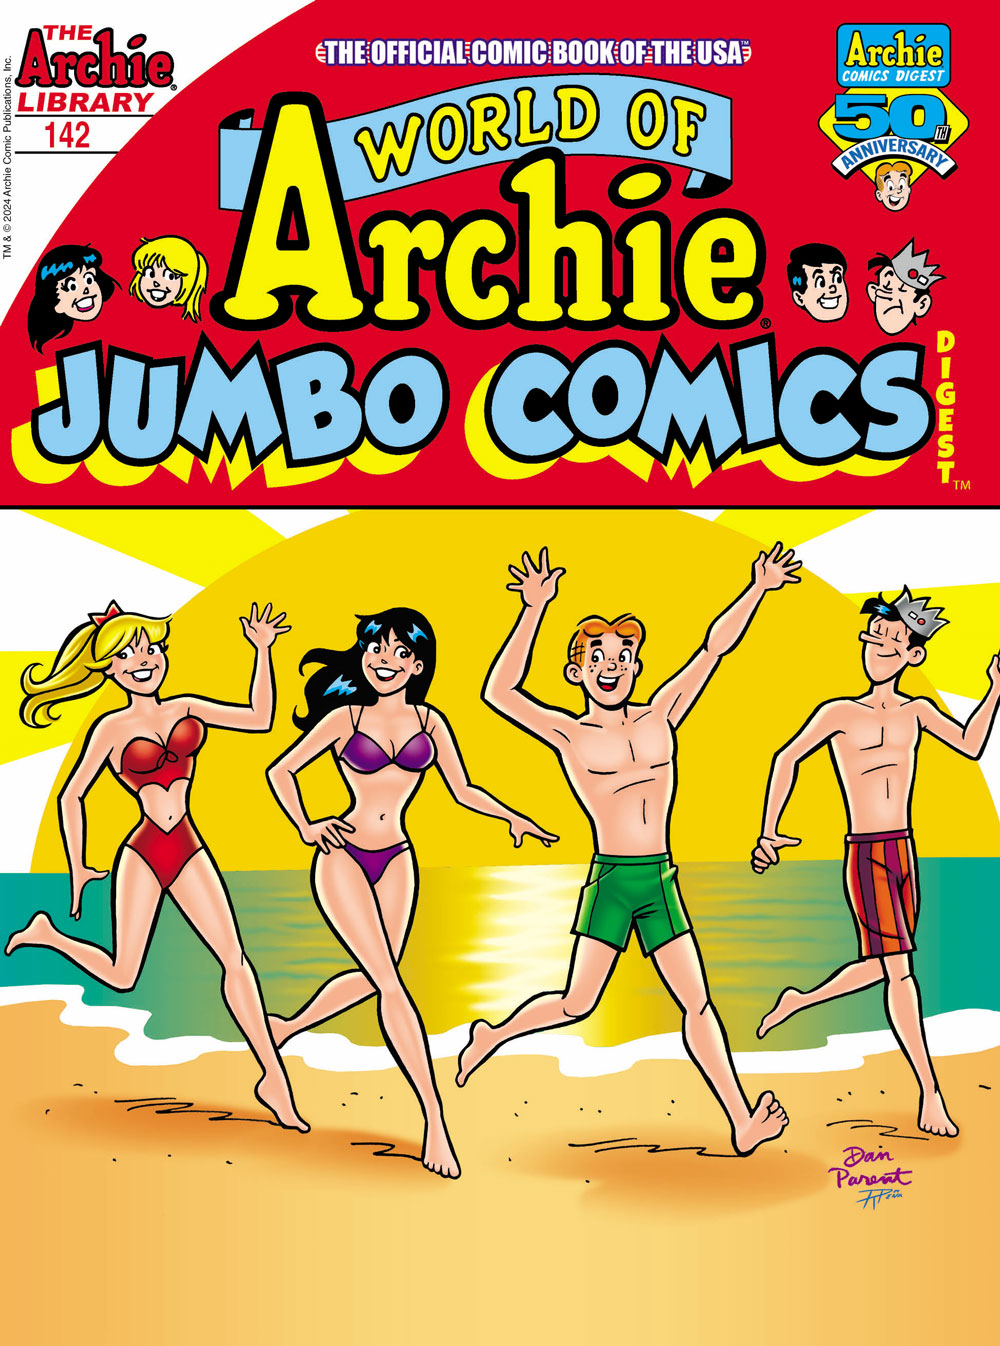 Betty, Veronica, Archie, and Jughead stride down a beach at sunset all wearing swimsuits. They're smiling and waving to the reader. The sun is huge and stylized behind them.